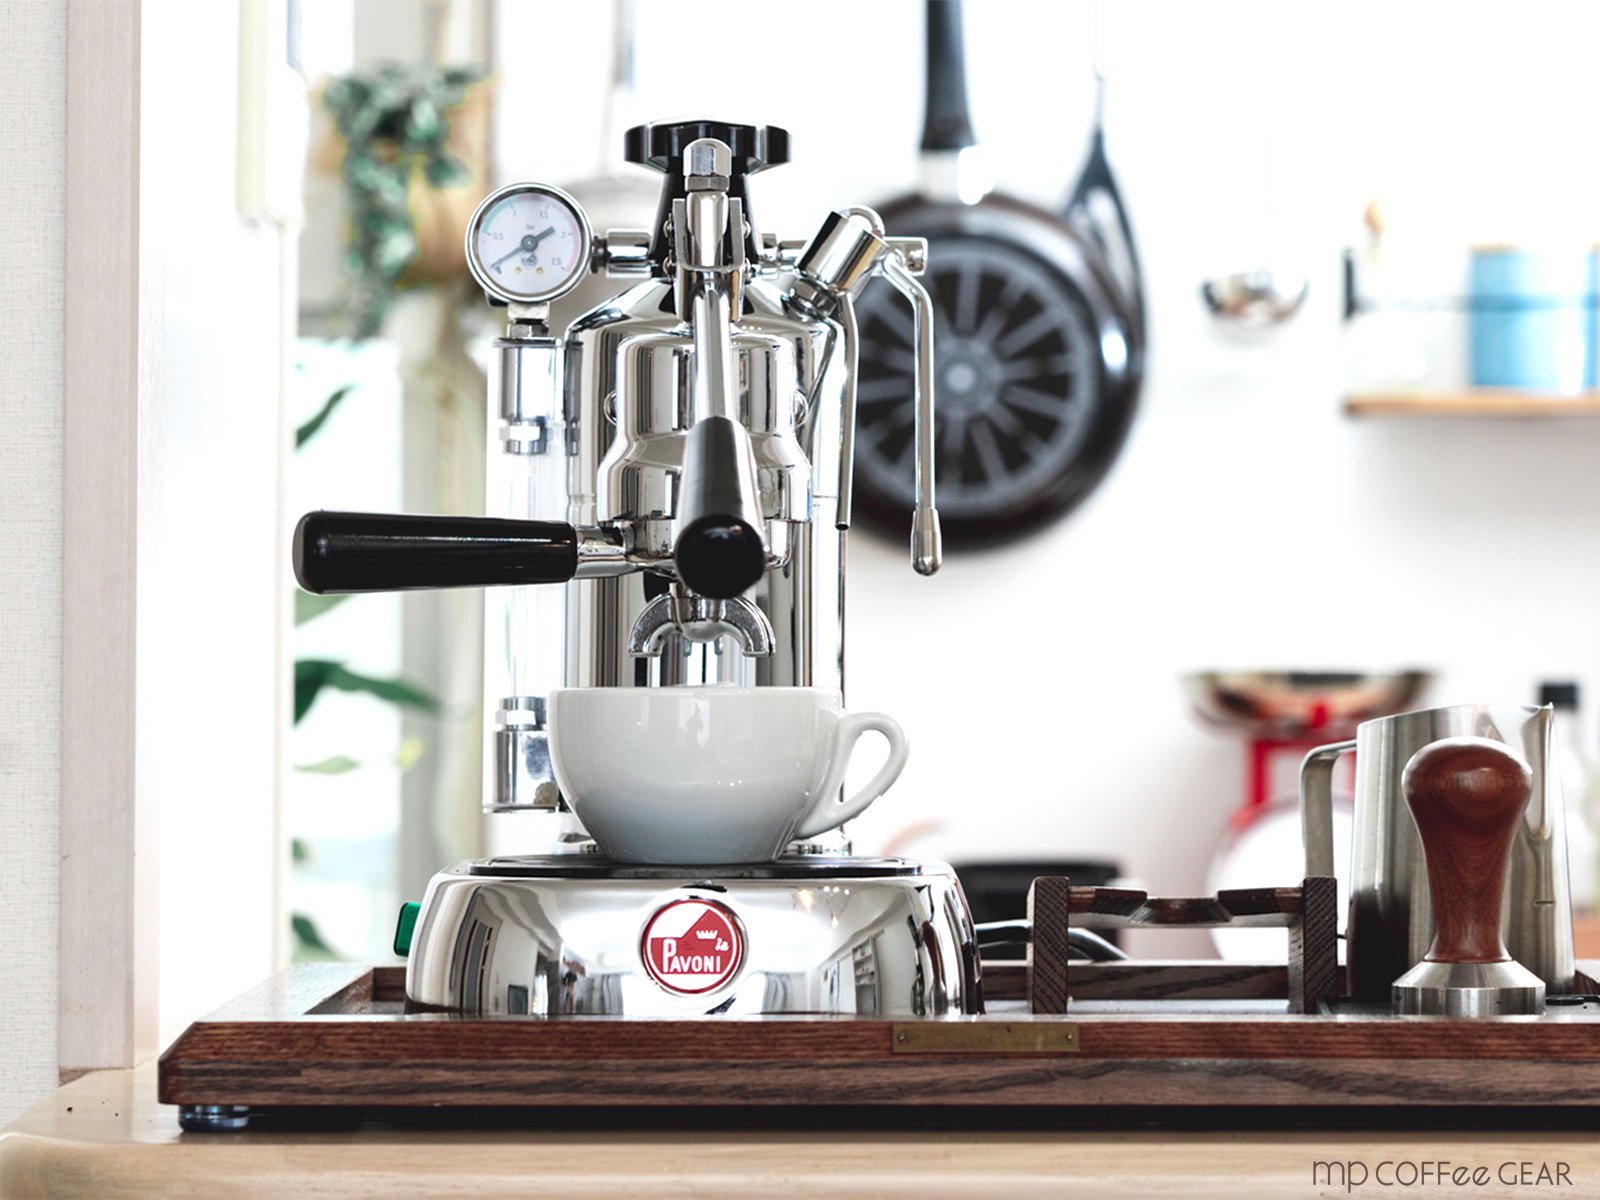  la Pavoni （ラ・パヴォーニ）エスプレッソマシン ”PROFESSIONAL” PL<img class='new_mark_img2' src='https://img.shop-pro.jp/img/new/icons16.gif' style='border:none;display:inline;margin:0px;padding:0px;width:auto;' /> 